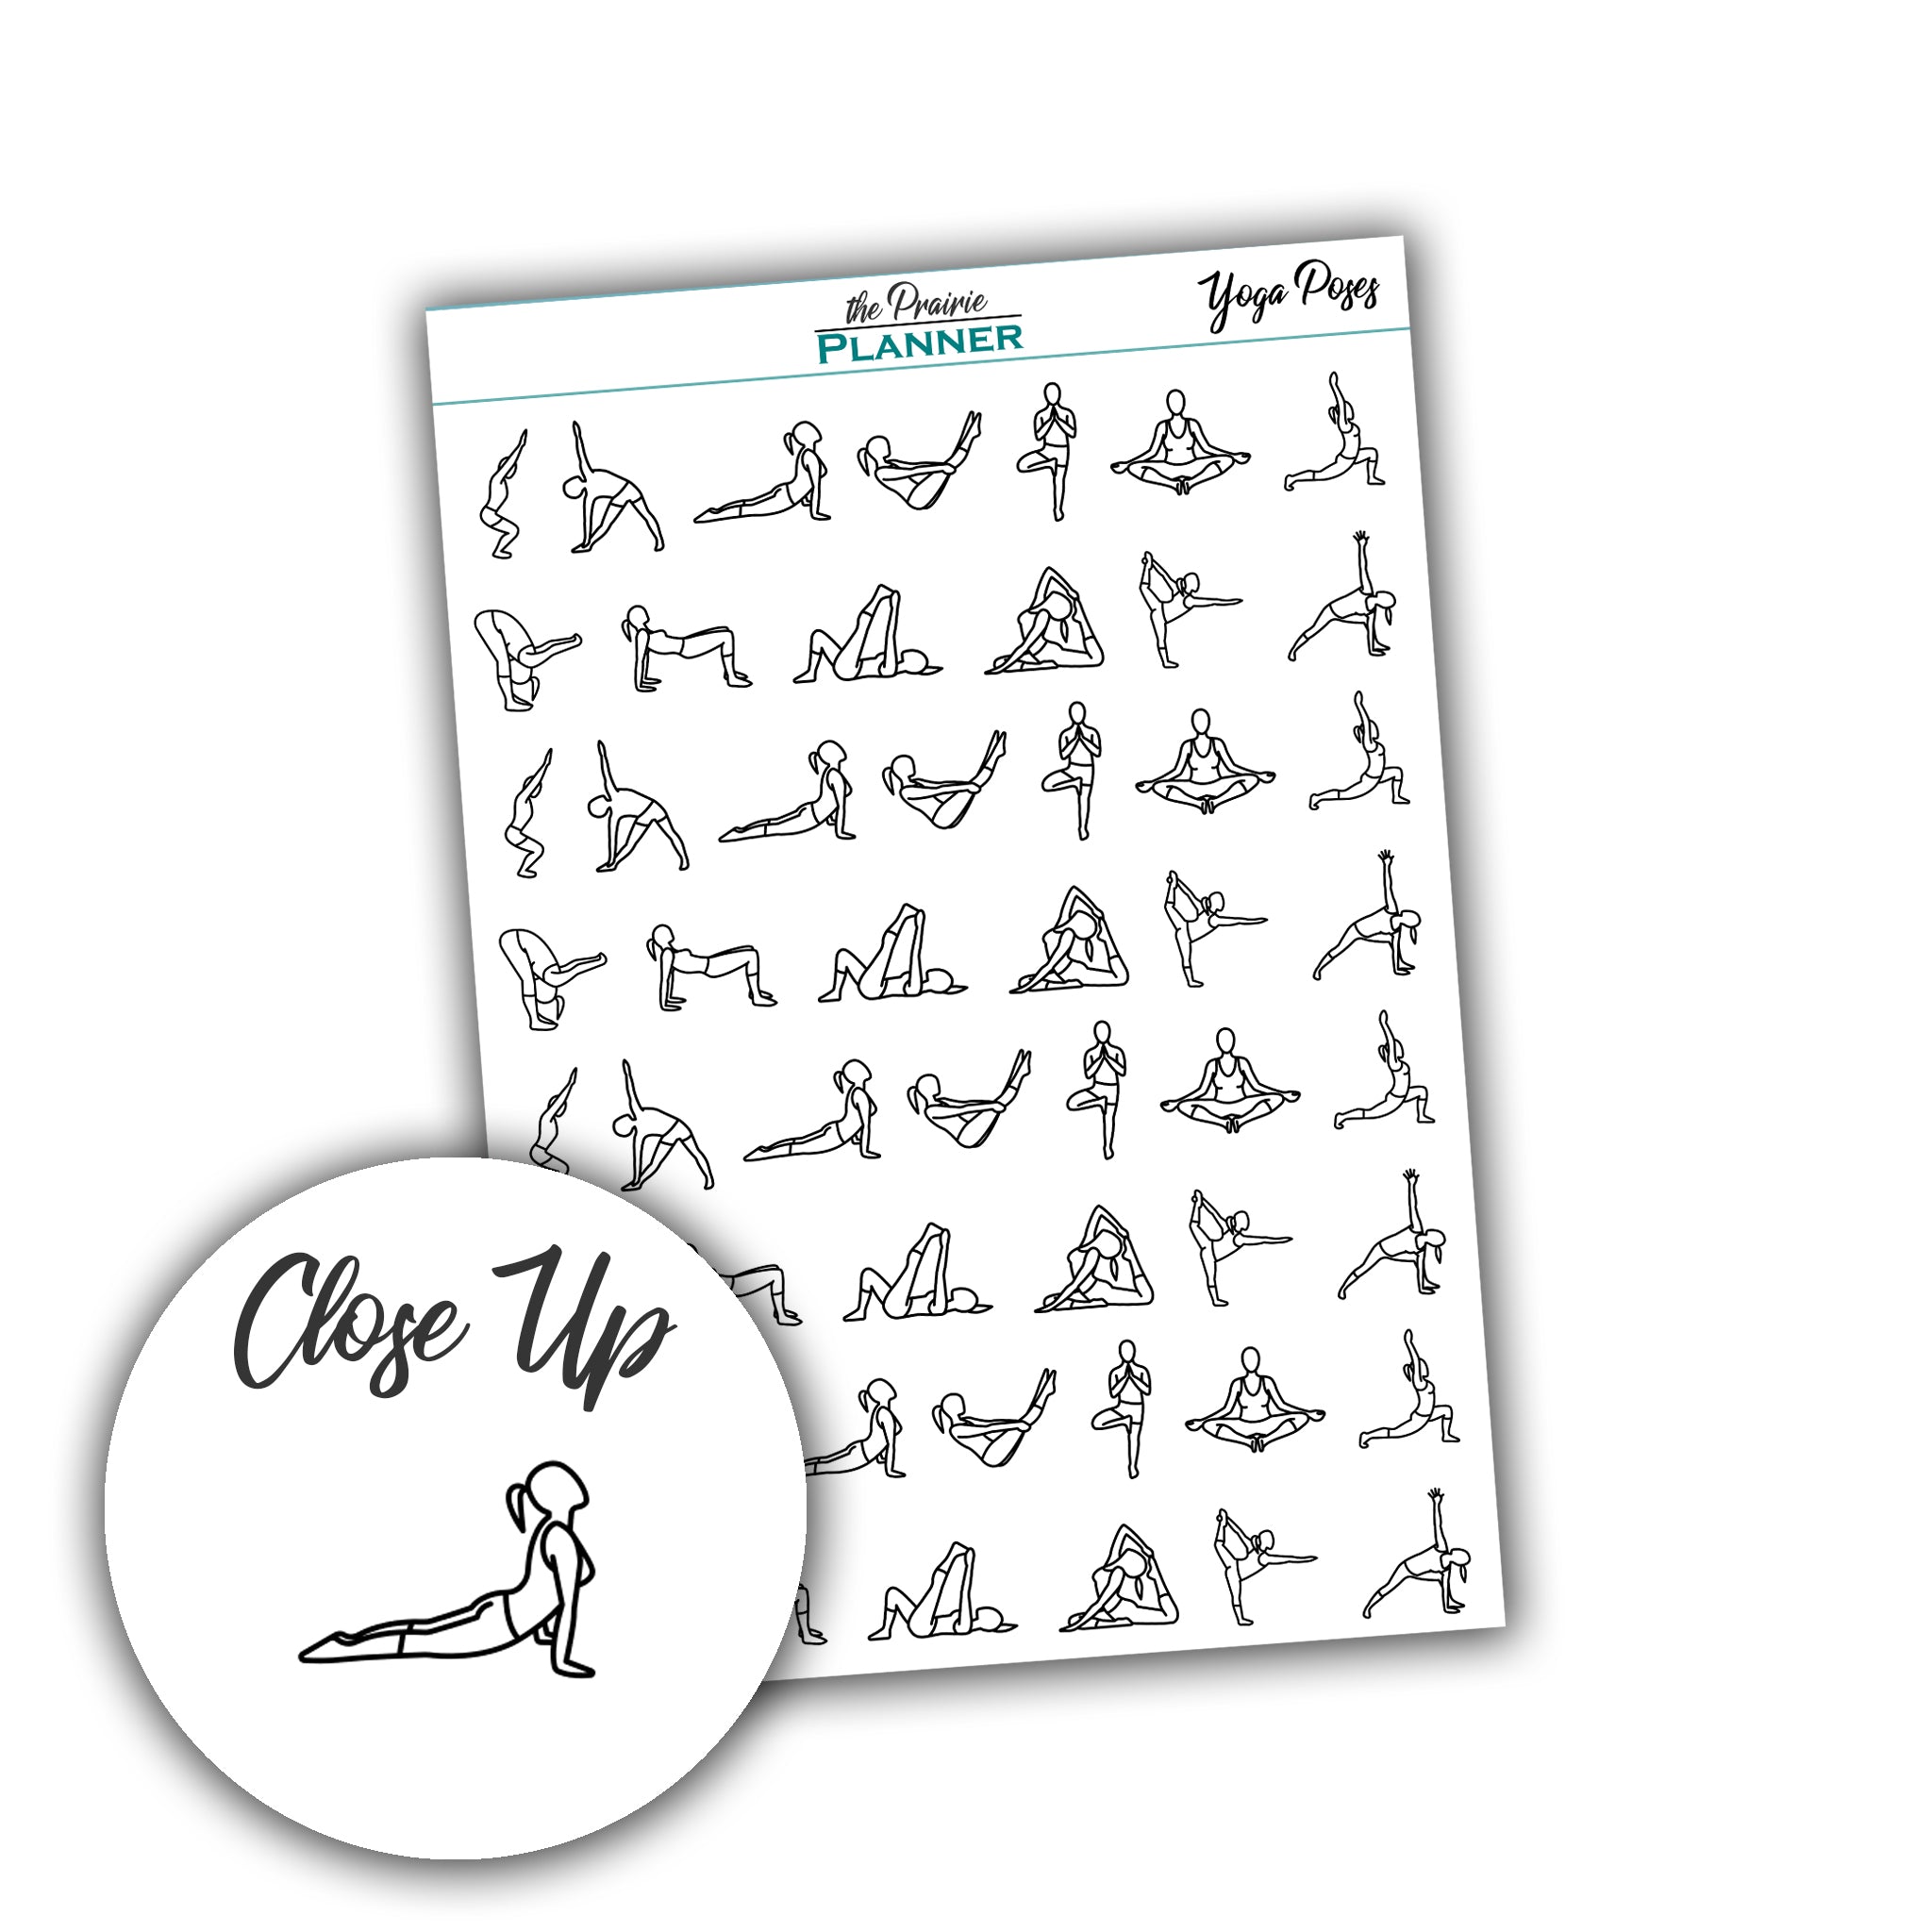 Yoga Poses - Planner Stickers